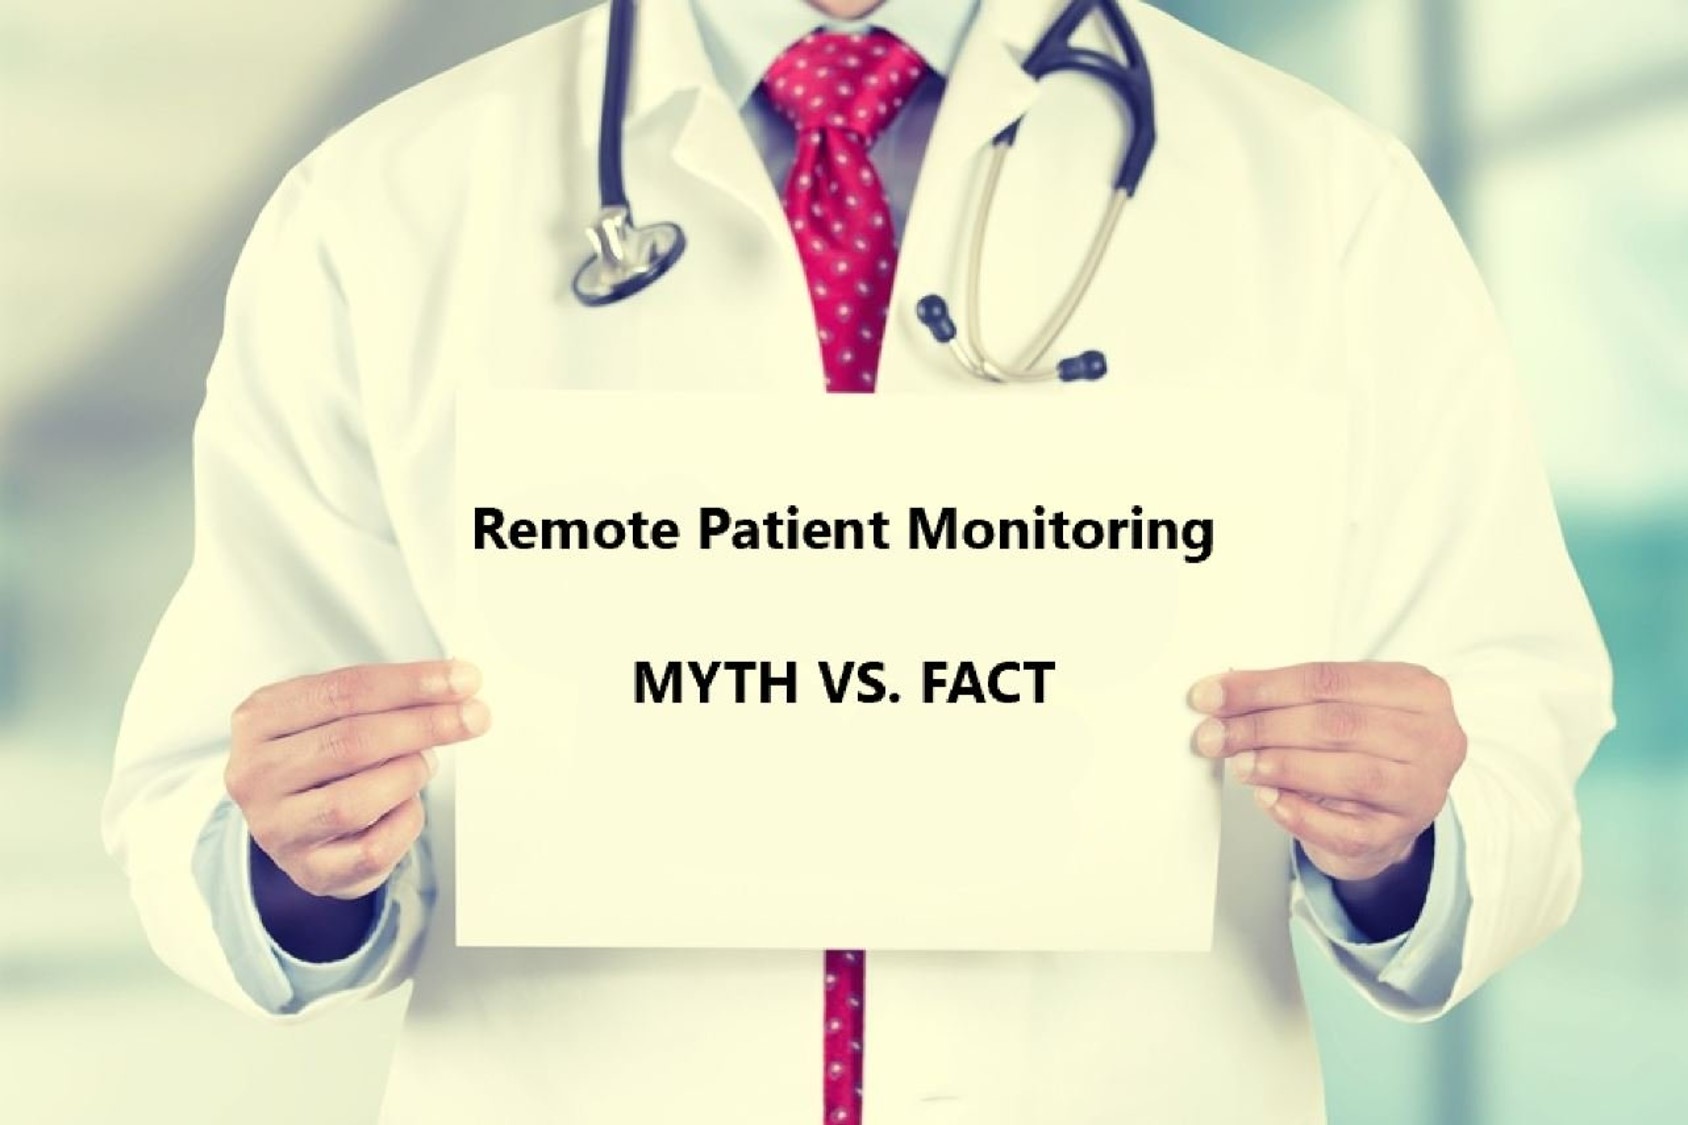 4 Myths about Remote Patient Monitoring